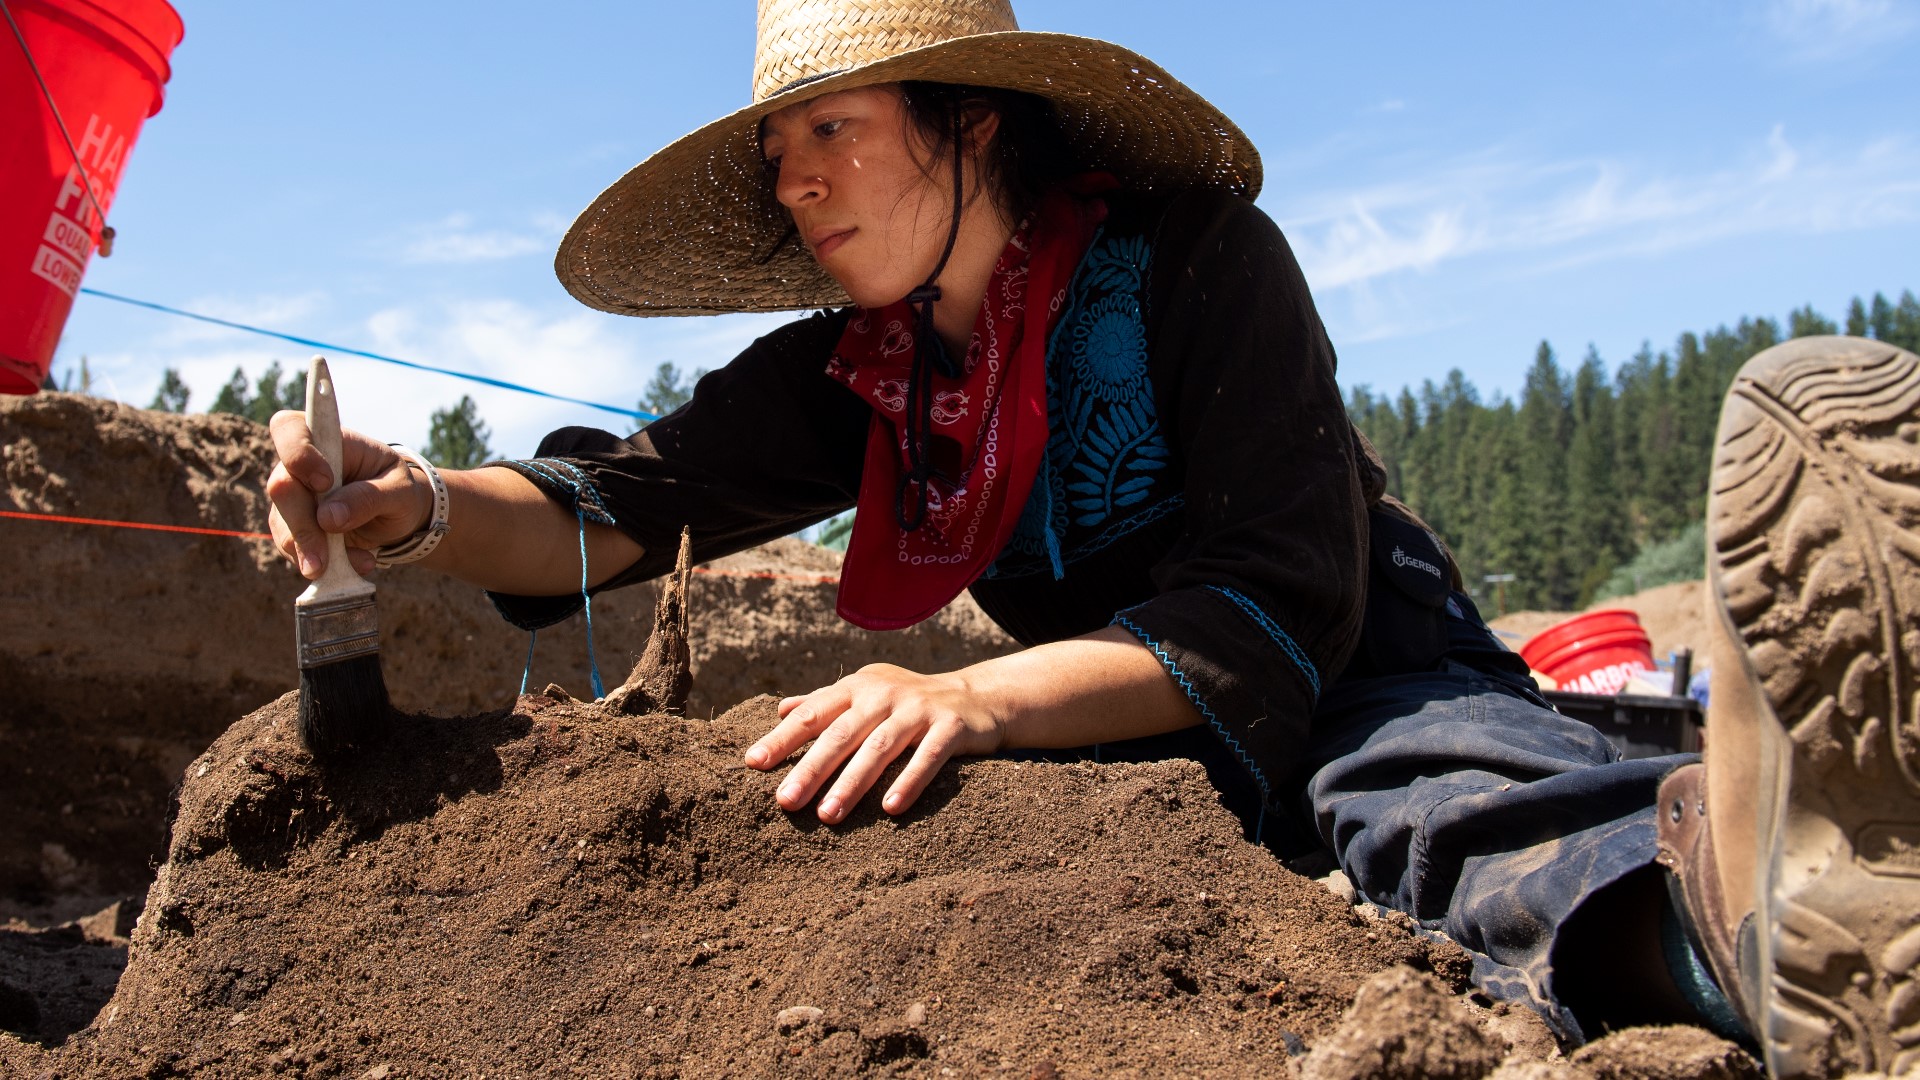 The project could reveal new insights into the foods the Kalispel people have been preparing and eating in the Inland Northwest for the last 5,000 years.